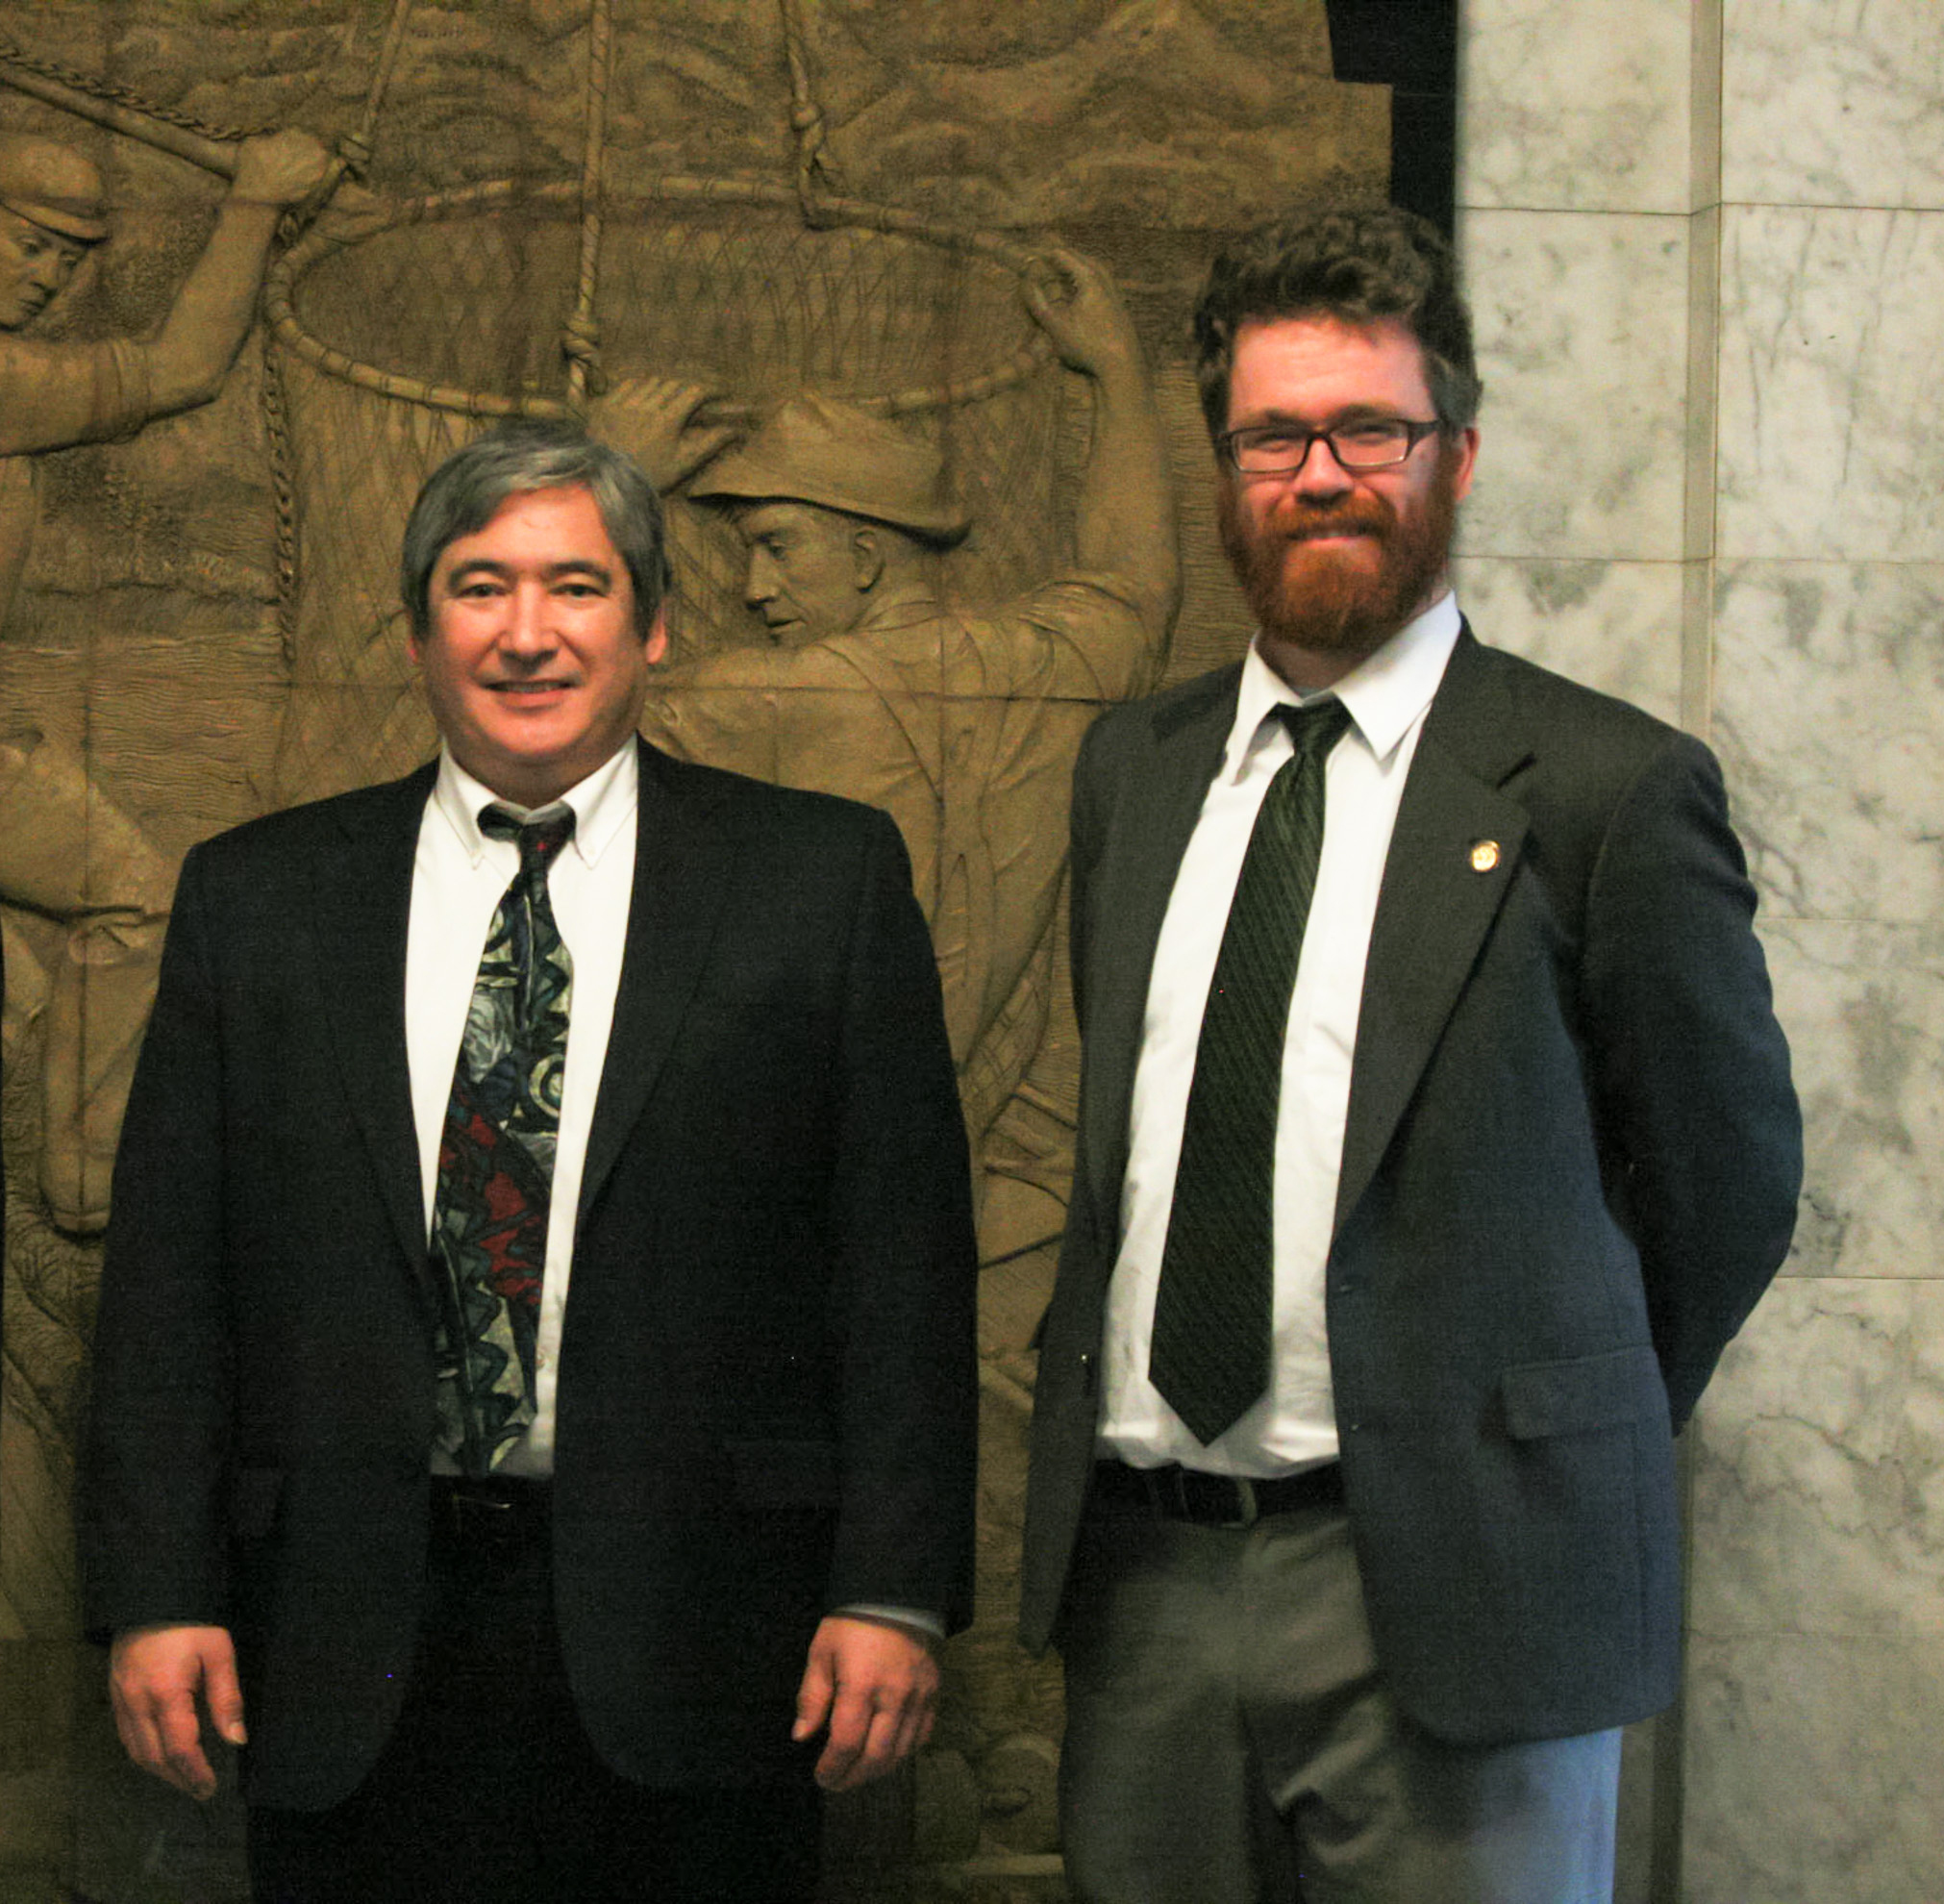 Rep. Sam Kito III (D-Juneau) and Rep. Justin Parish (D-Juneau) stand in the Capitol in February. They both say the Legislature accomplished some good in the legislative session, but has more work to do. (Photo courtesy office of Rep. Sam Kito)